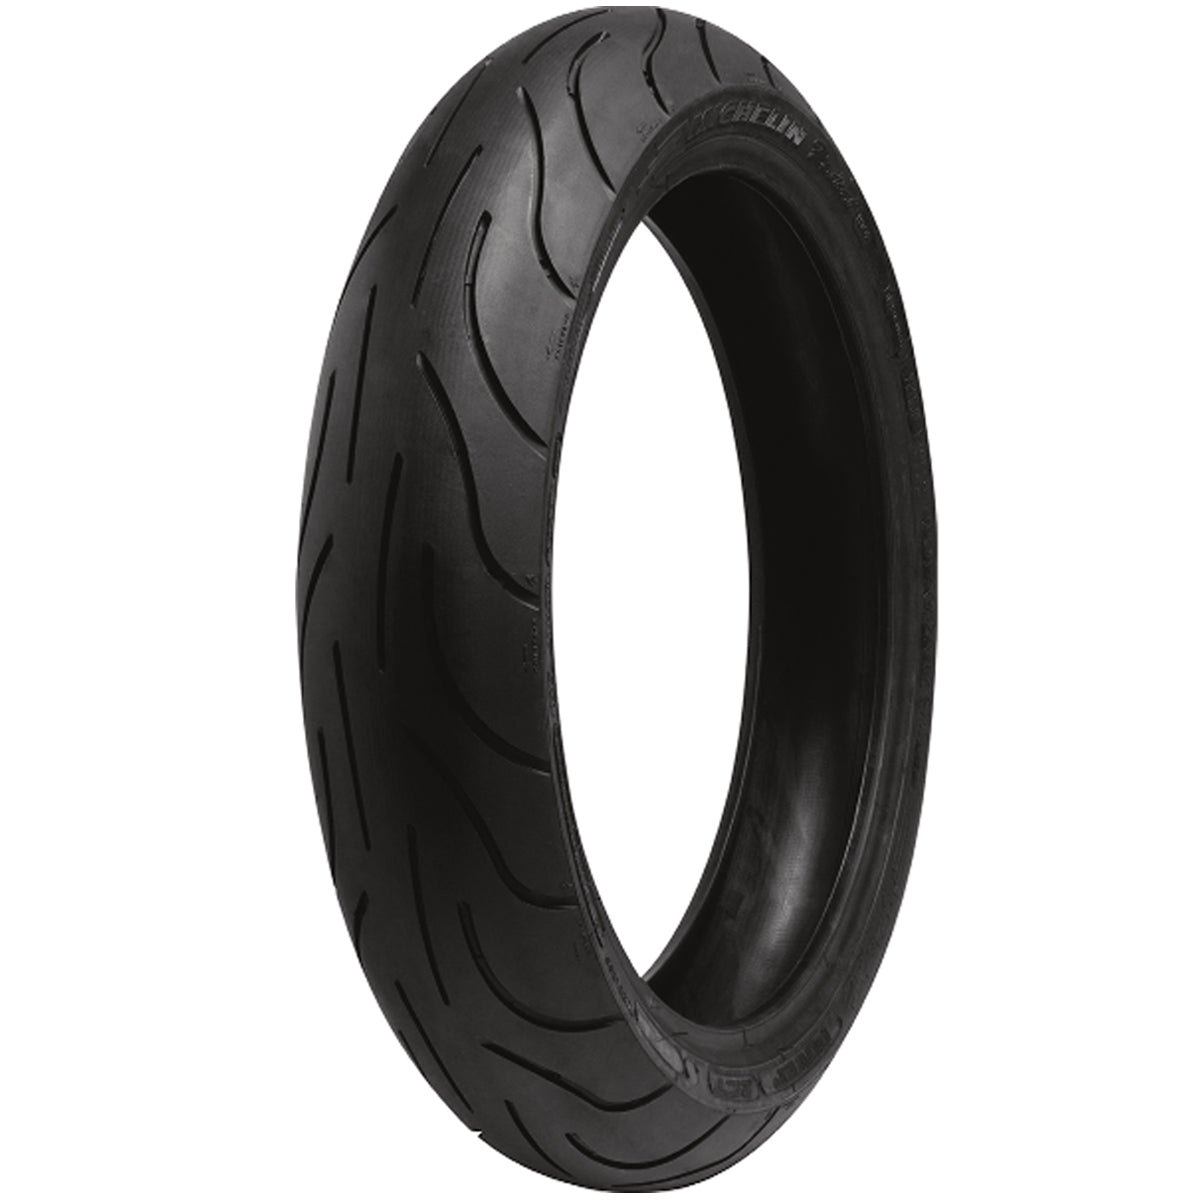 Michelin Pilot Power 2CT Dual Compound Sport Radial 17" Front Street Tires-0301